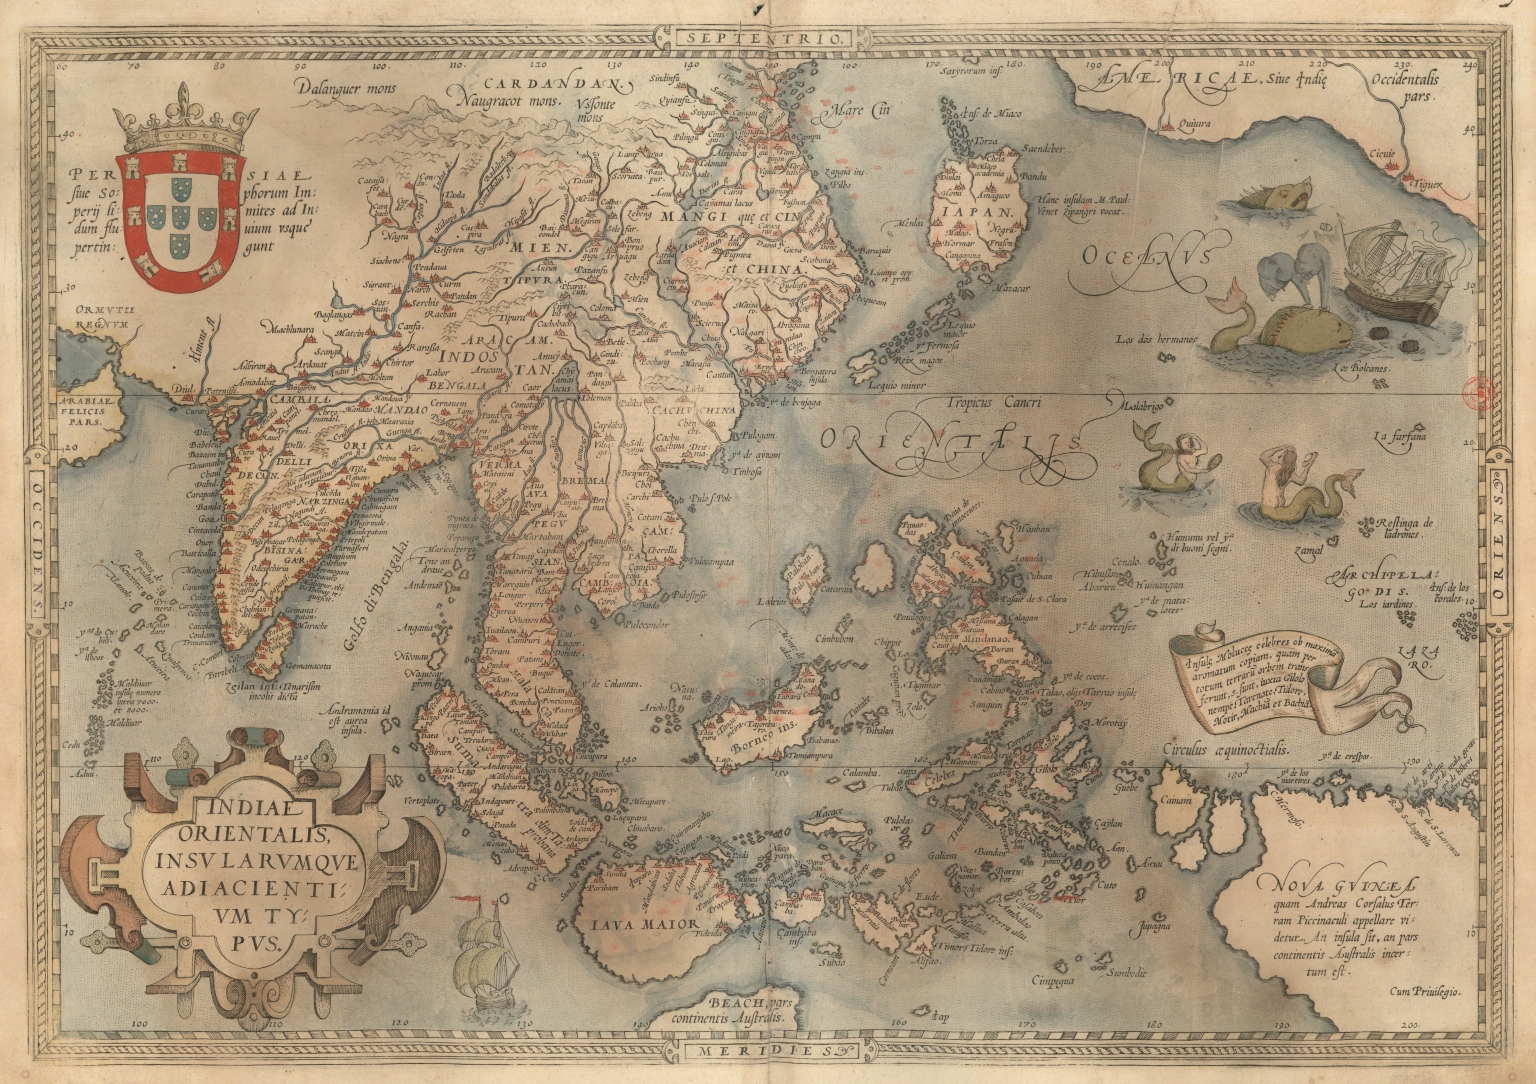 A map of the East Indies and surrounding islands.